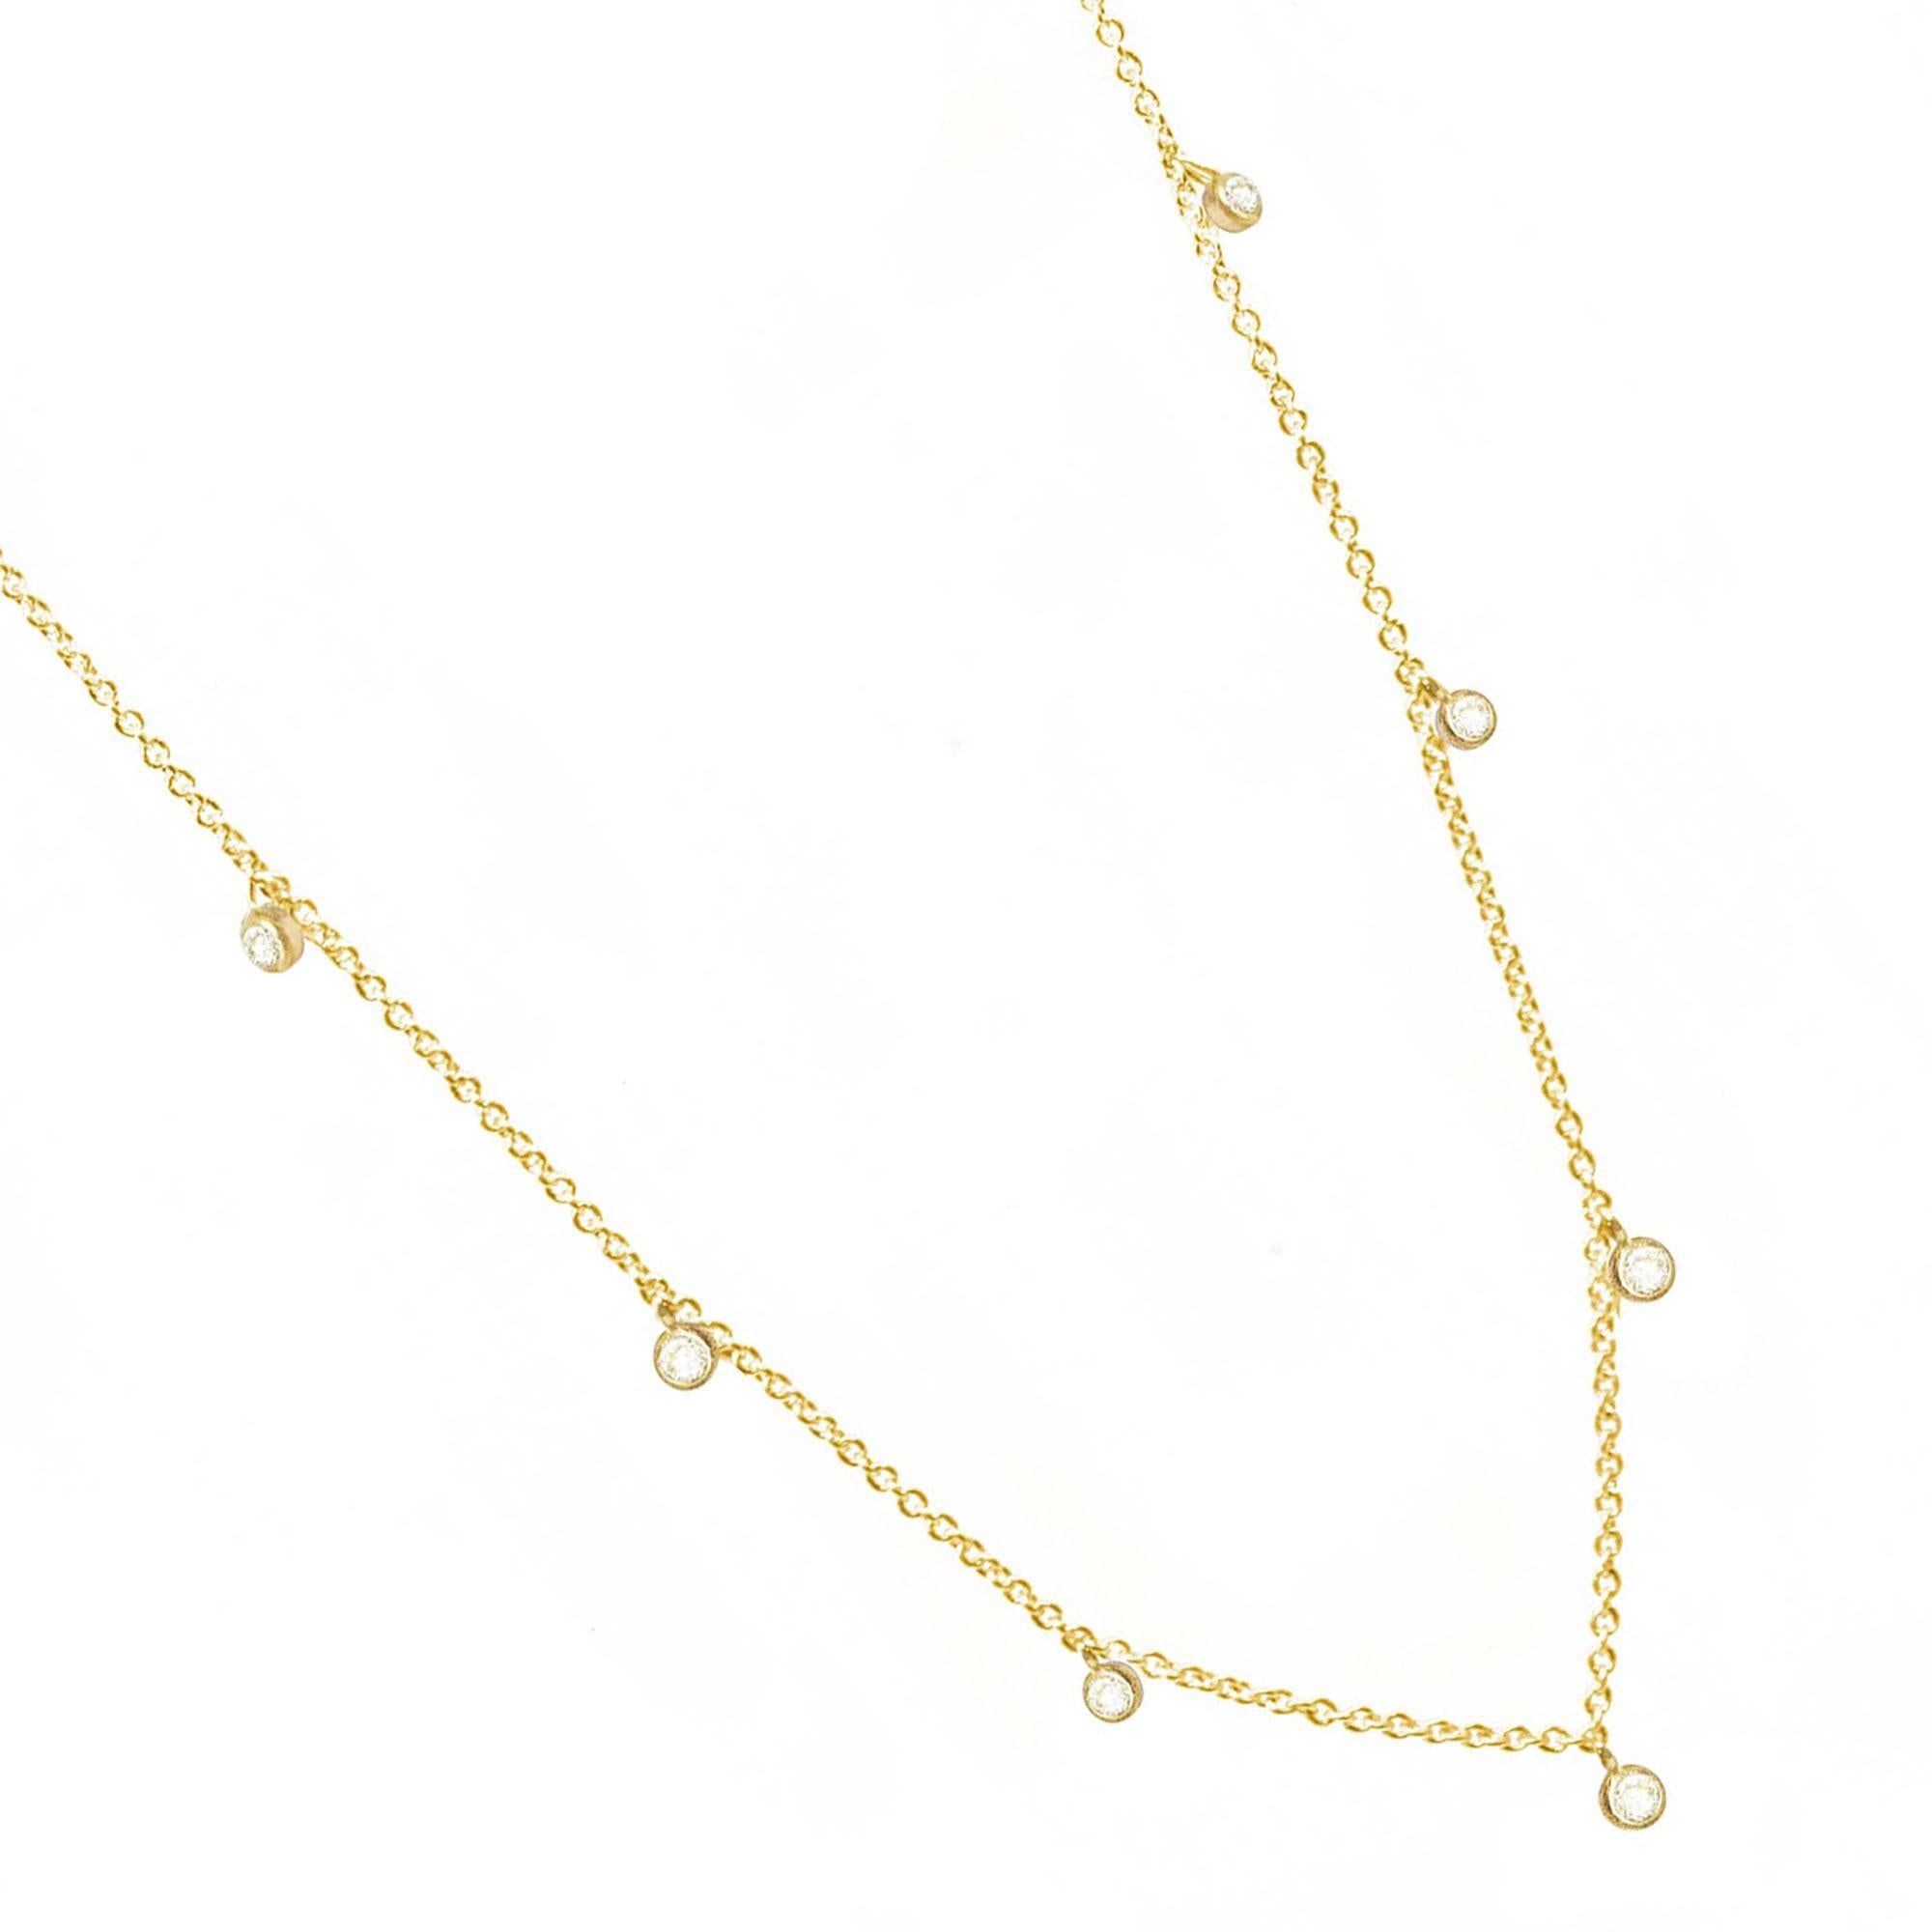 Made with diamond rimmed in gold, our Forged Gold Necklace provides an effortless, yet fashionable style.

Details
Metal: 18K Yellow Gold
Diamond carat: 0.3
Length: 15-17''
Stone size: 2mm

About the stones:
Diamond:

Metaphysical